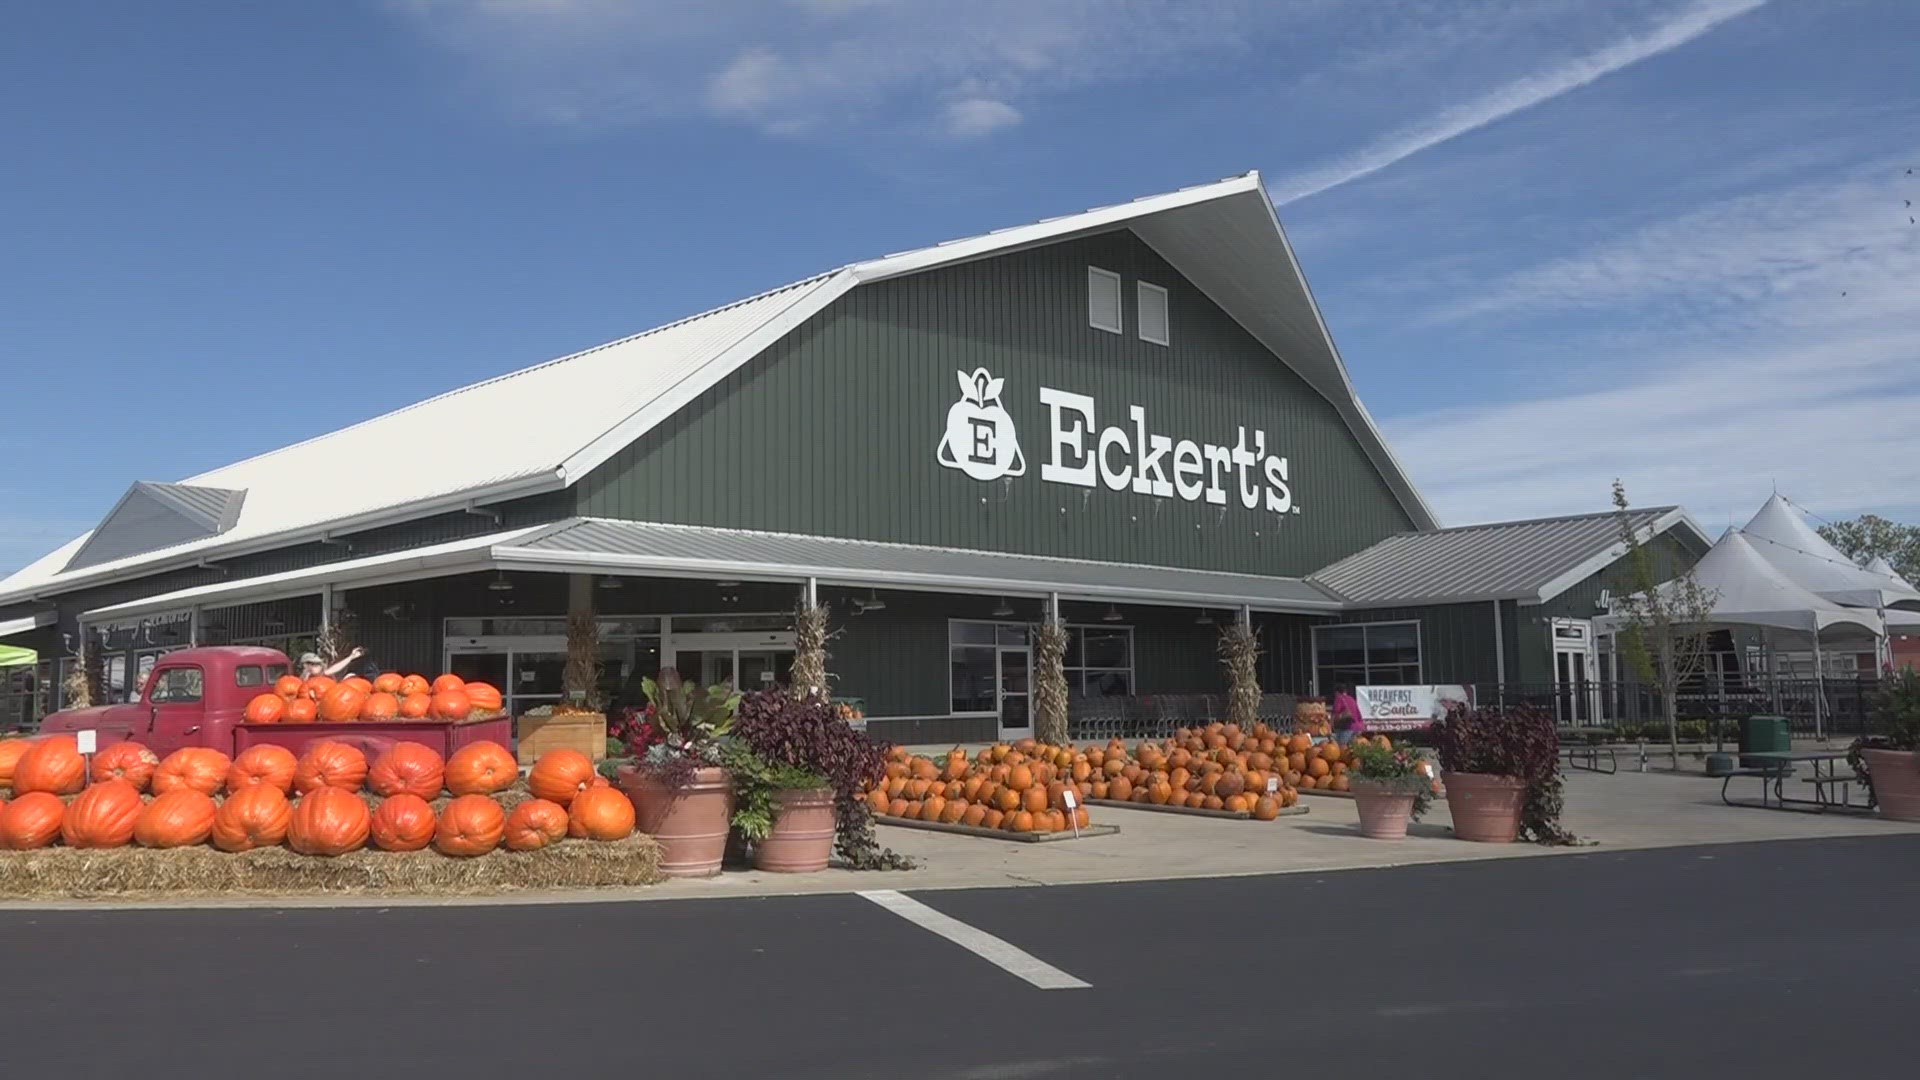 To celebrate the start of the fall season, on Sept. 22, all three Eckert's Farm locations are opening their pumpkin patches. The pumpkins cost 79 cents per pound.